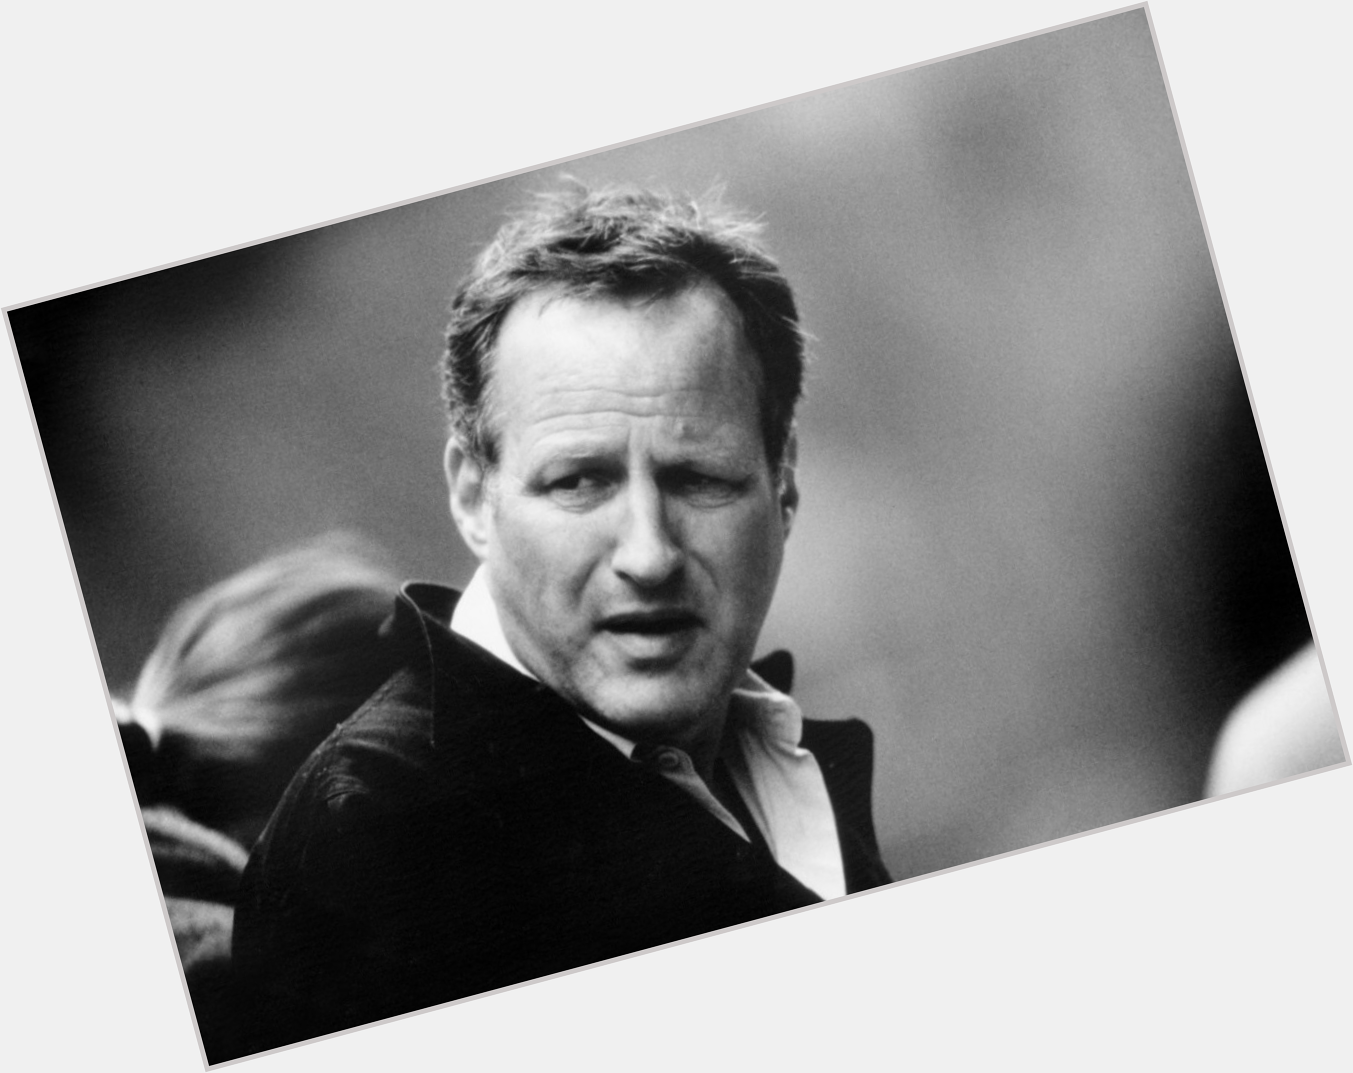 Happy birthday, Michael Mann!

Watch a one-hour documentary on his career:  